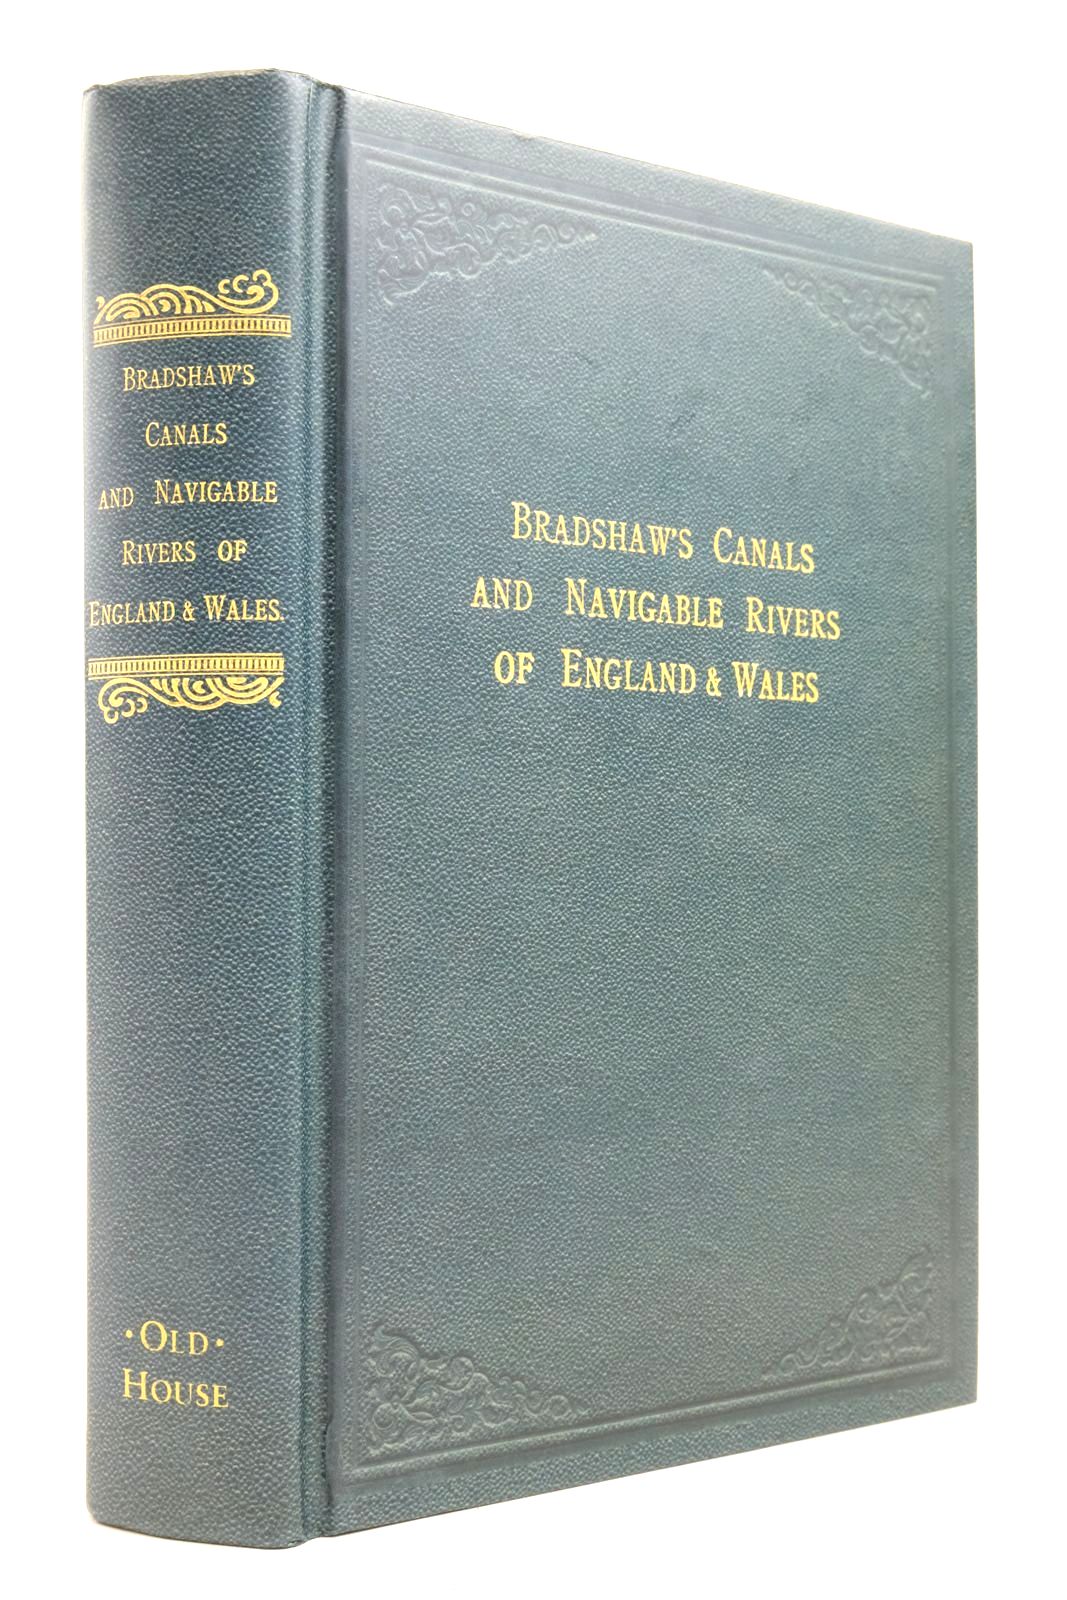 Photo of BRADSHAW'S CANALS AND NAVIGABLE RIVERS OF ENGLAND AND WALES written by De Salis, Henry Rodolph published by Old House Books (STOCK CODE: 2137783)  for sale by Stella & Rose's Books